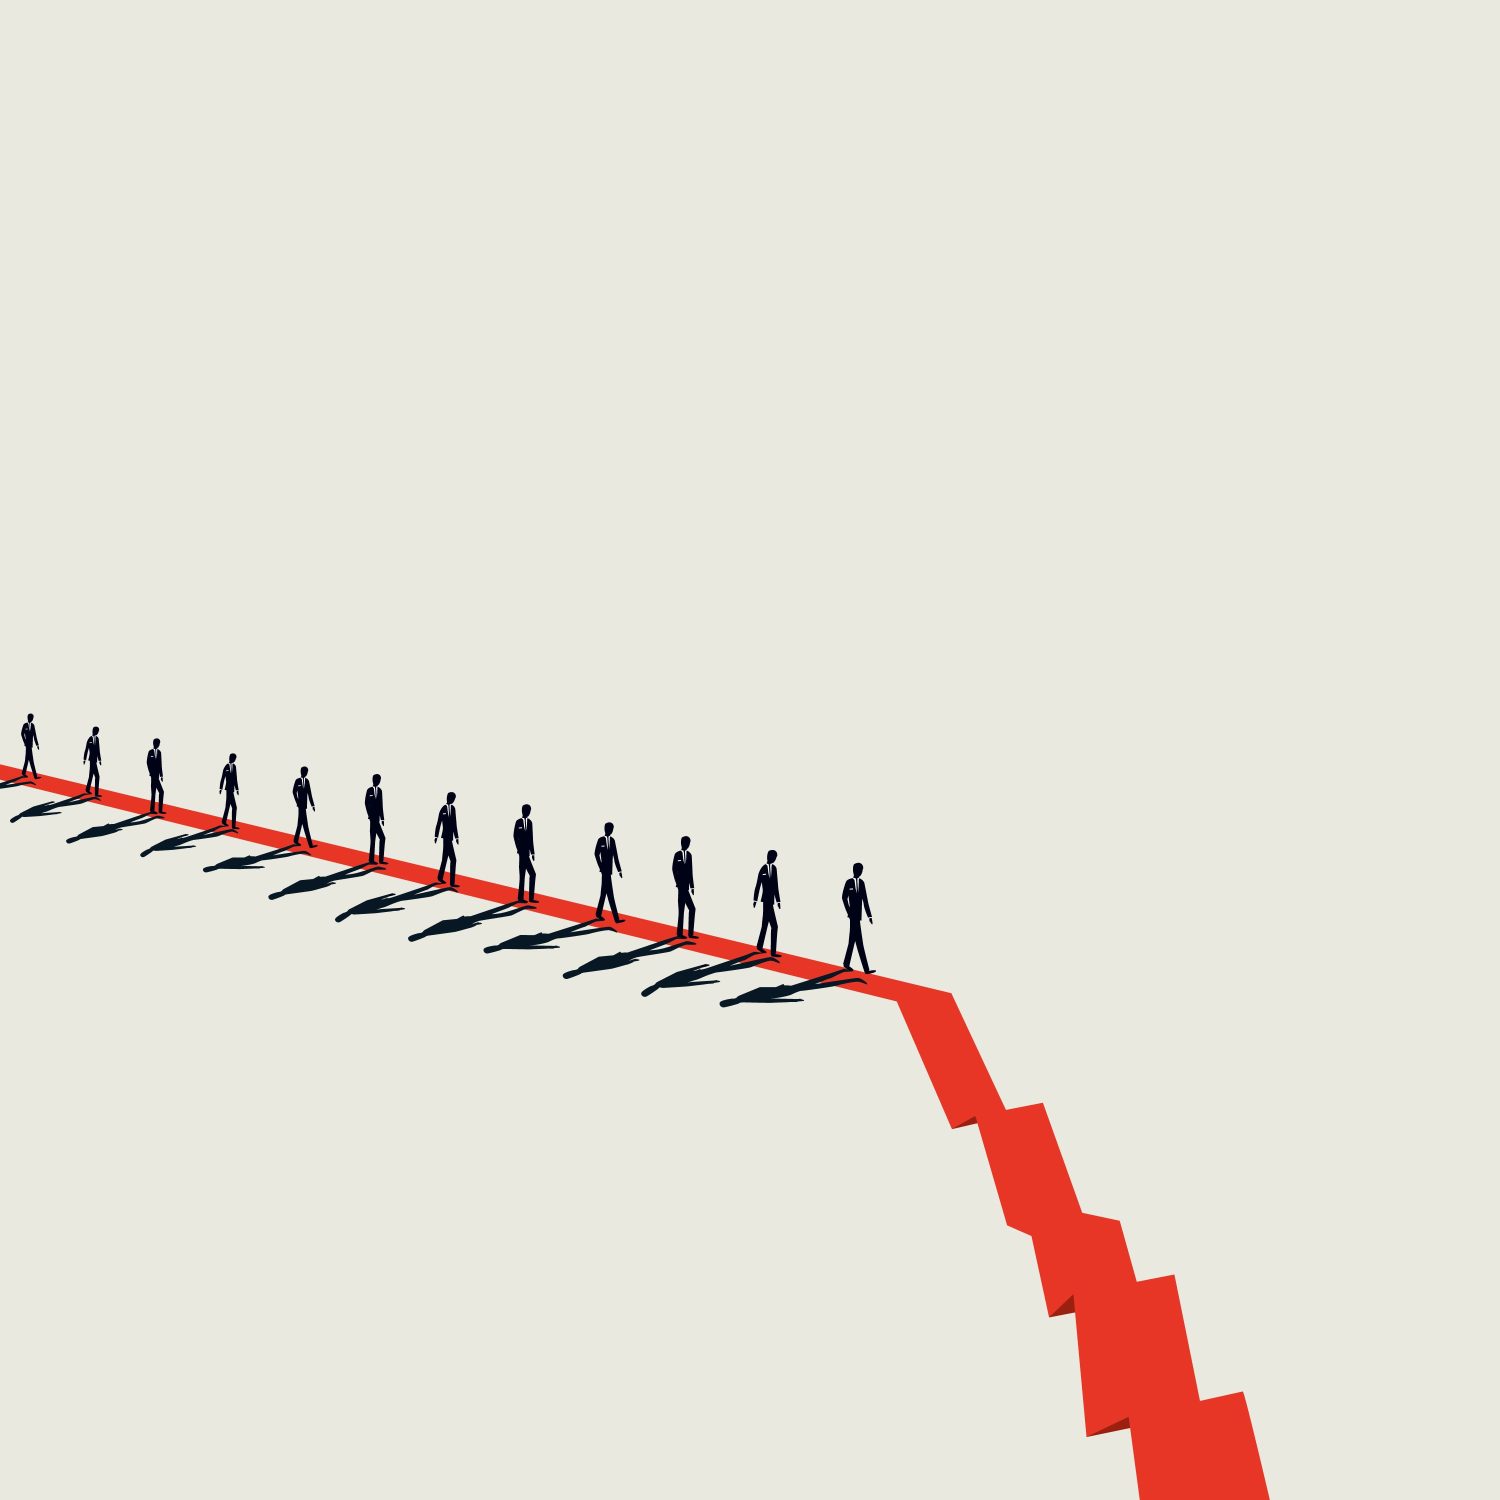 Illustration of people walking on a red graph line